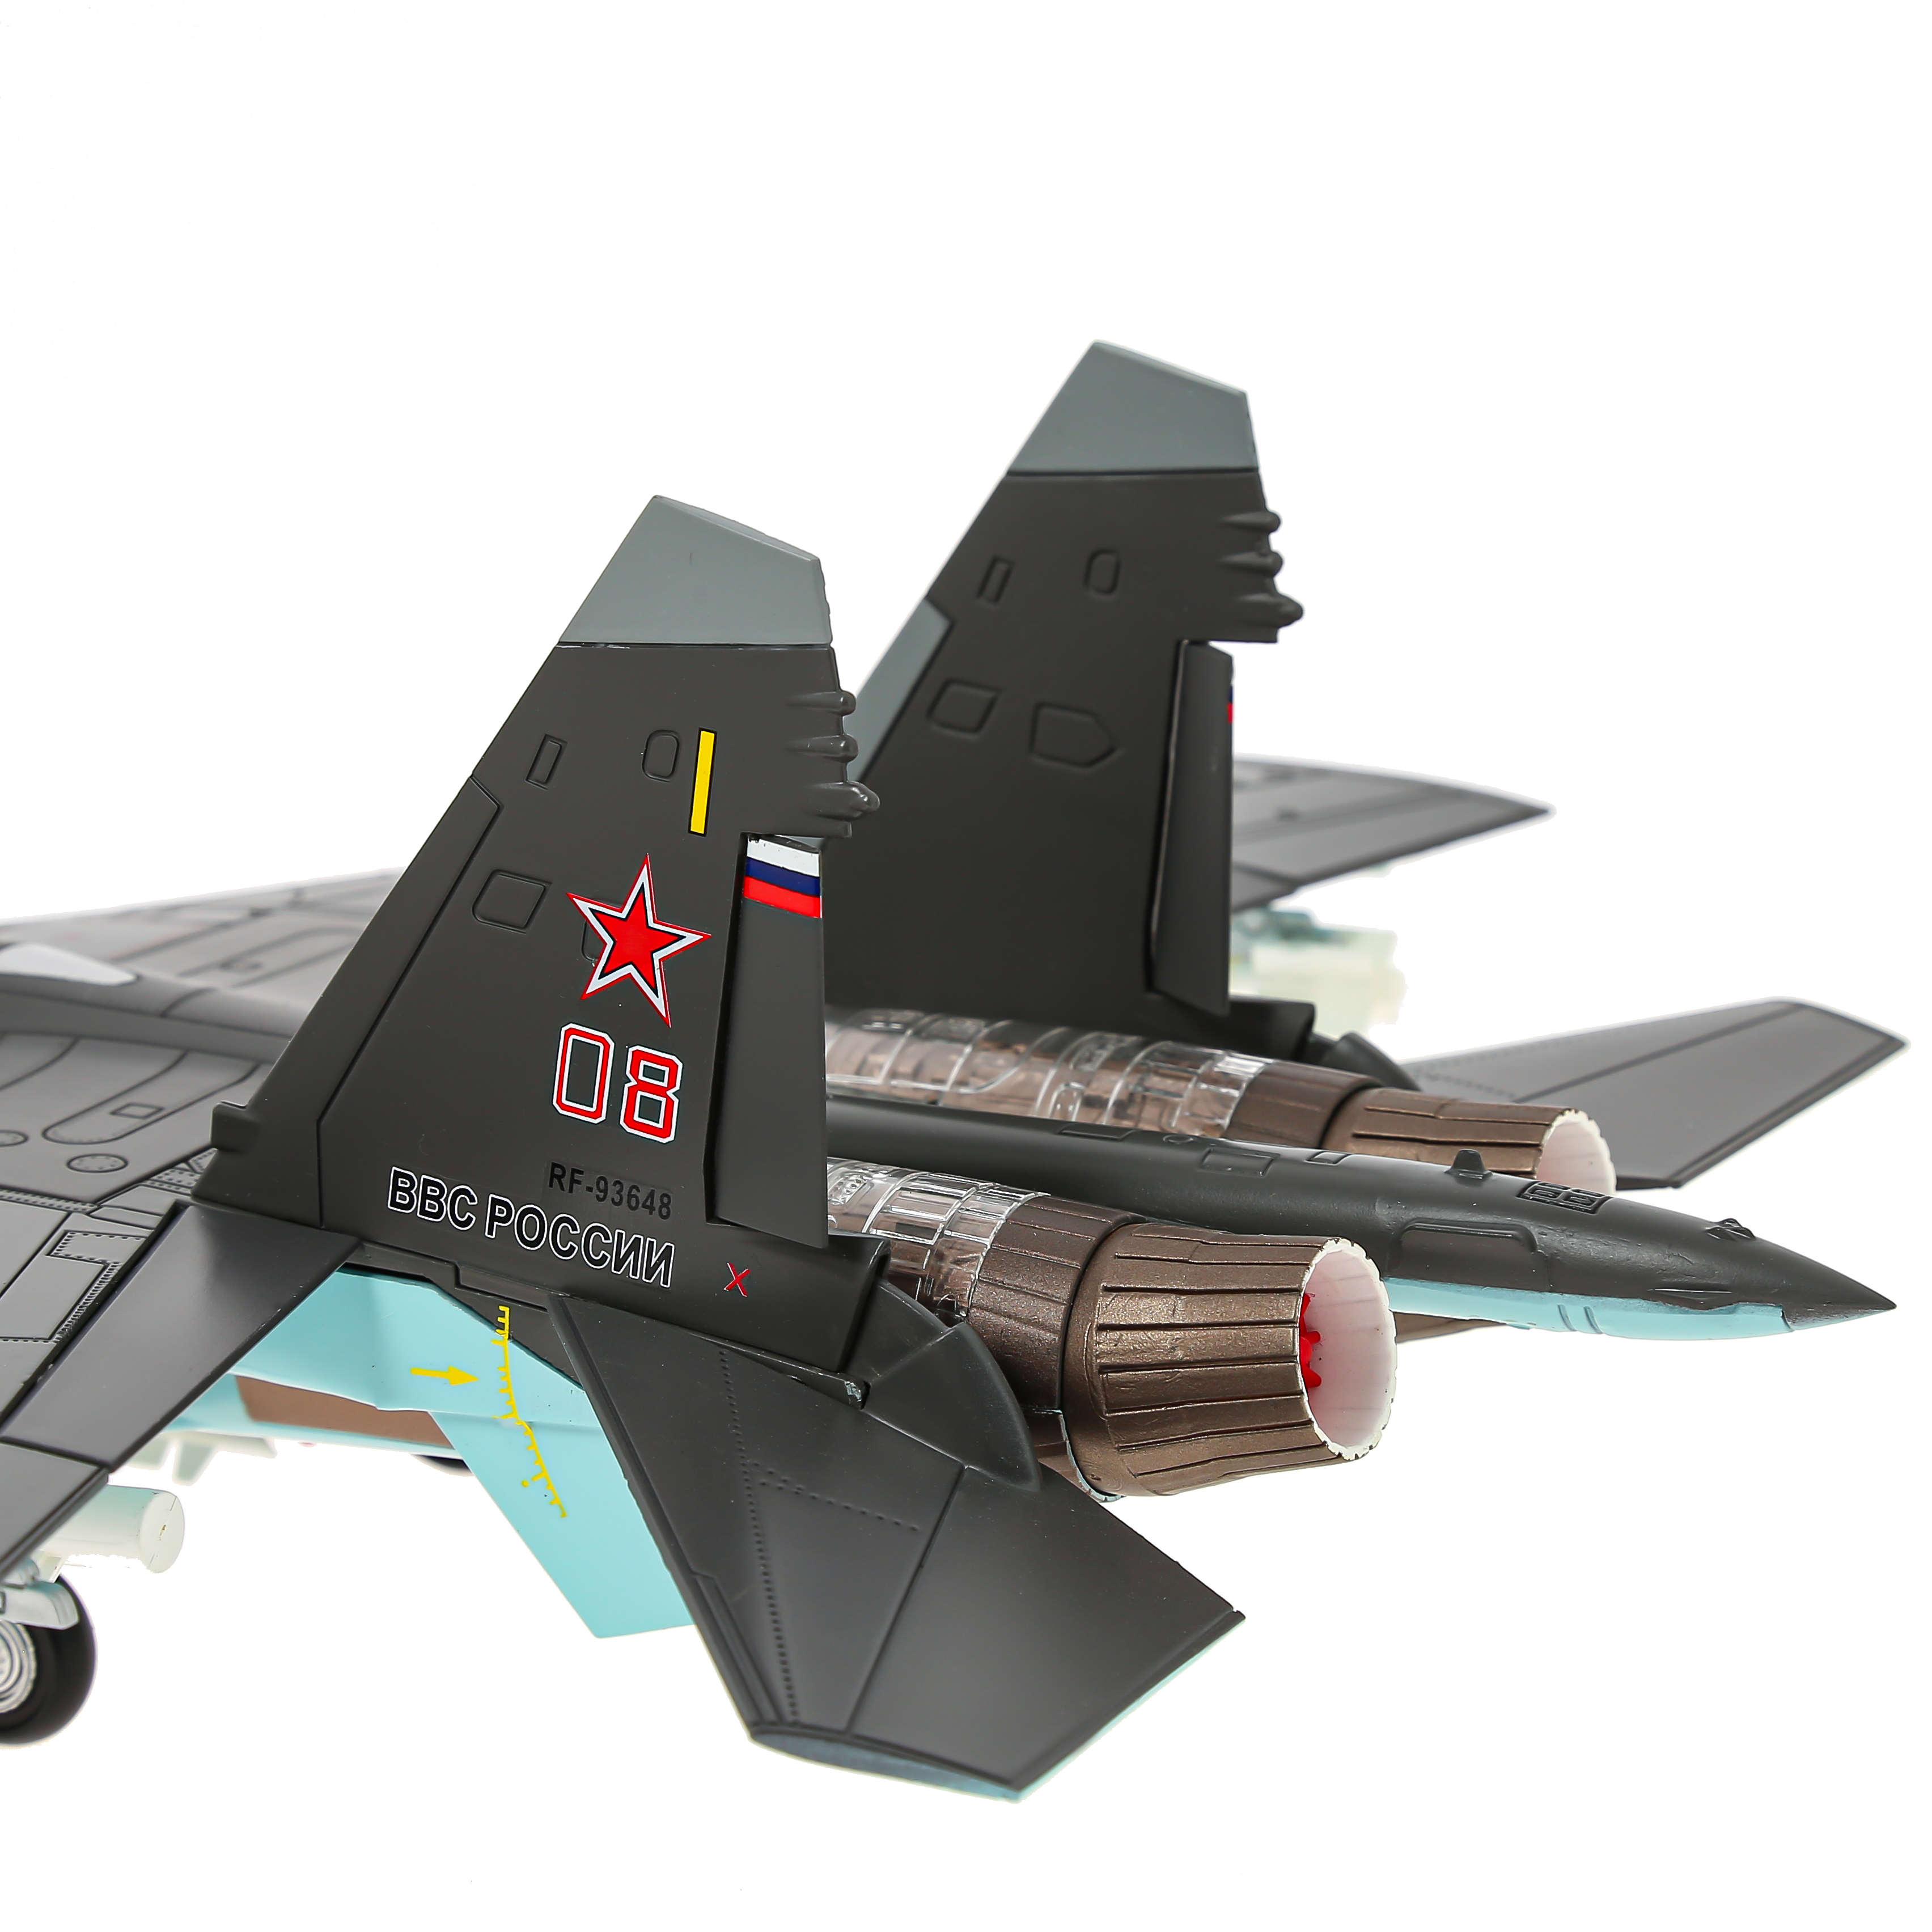       -35 ,  1:48.  47 . Large metal model of a Russian Su-35 fighter airplane, scale 1:48. Length 47 cm. # 7 hobbyplus.ru